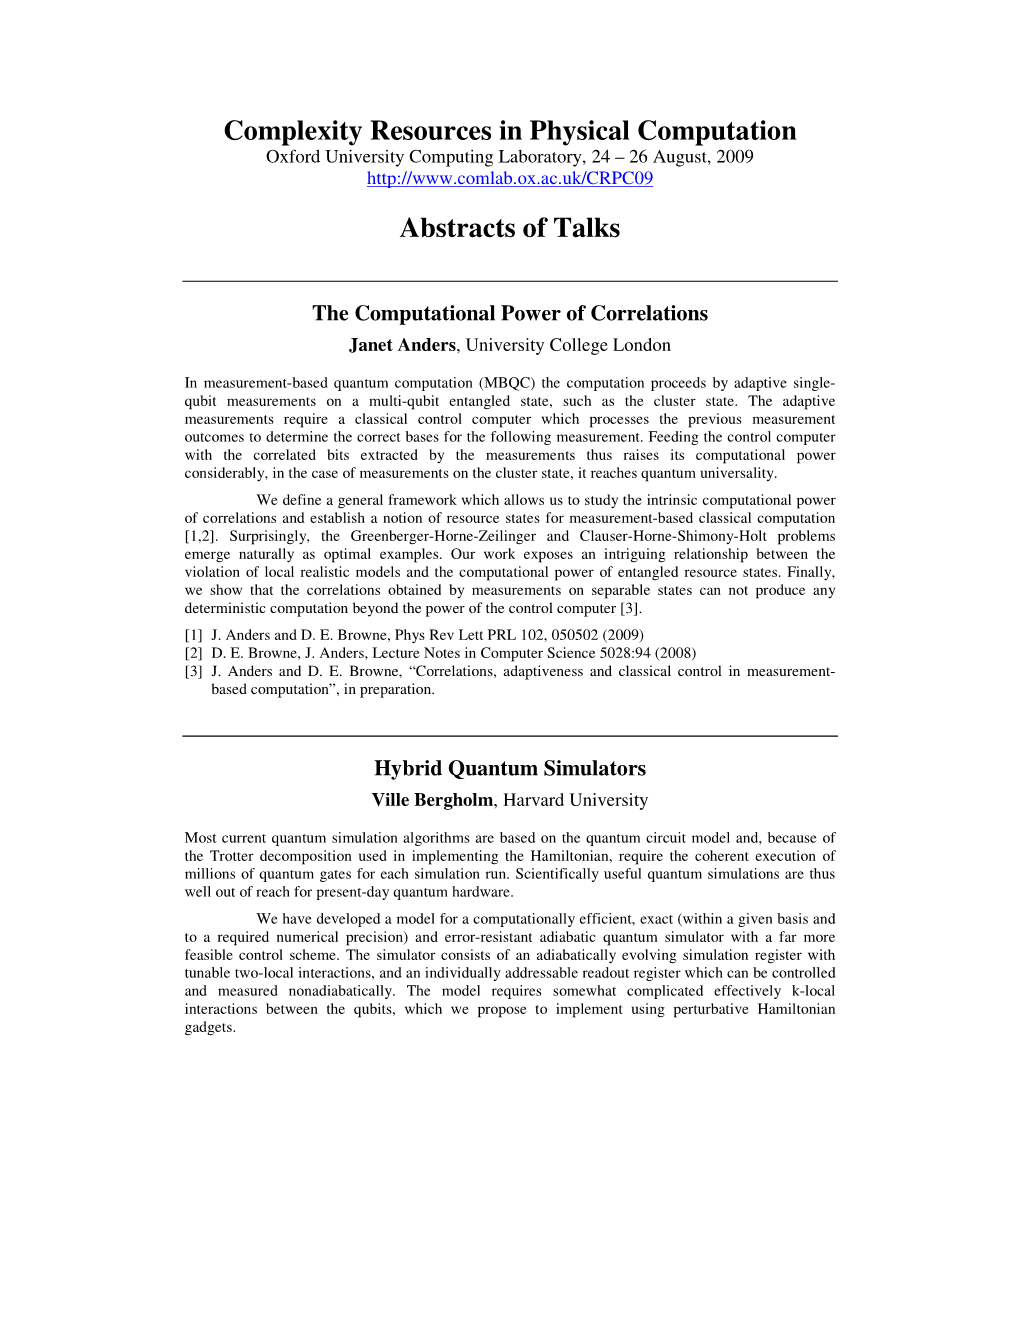 Complexity Resources in Physical Computation Abstracts of Talks